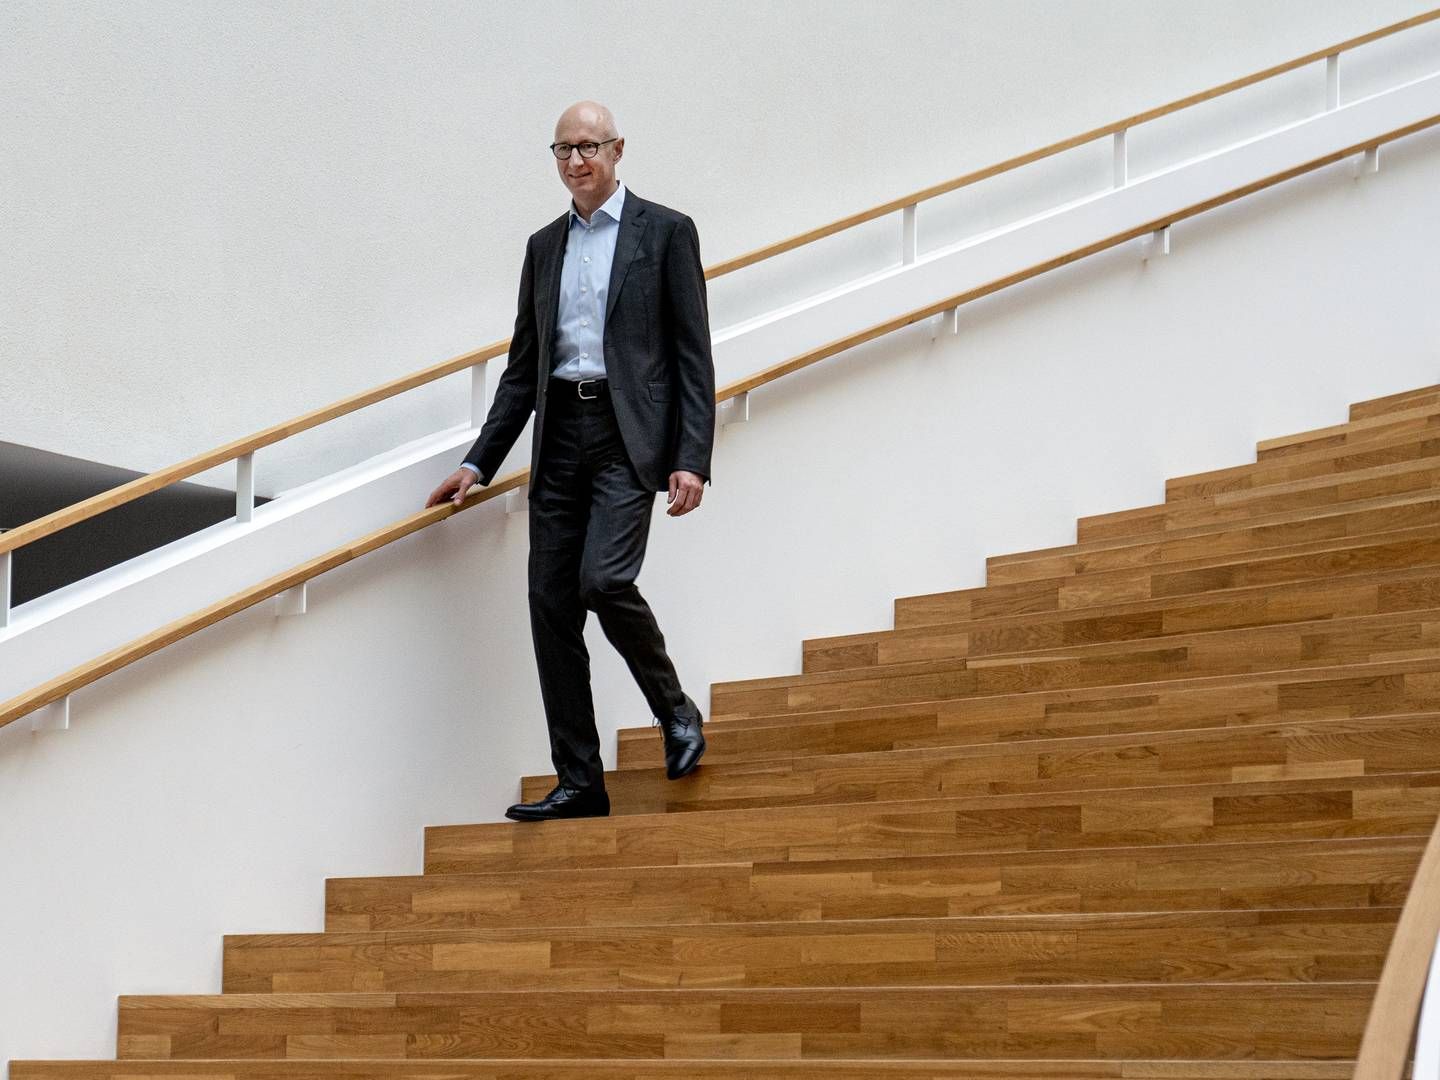 At the turn of the year, Lars Fruergaard Jørgensen will have been the CEO of Novo Nordisk for the past five years. He took over the role on Jan. 1, 2017, after the firm's former long-standing CEO Lars Rebien Sørensen. "The five years have just flown by. Time has gone extreme fast," says Fruergaard Jørgensen. | Photo: Stine Bidstrup/ERH